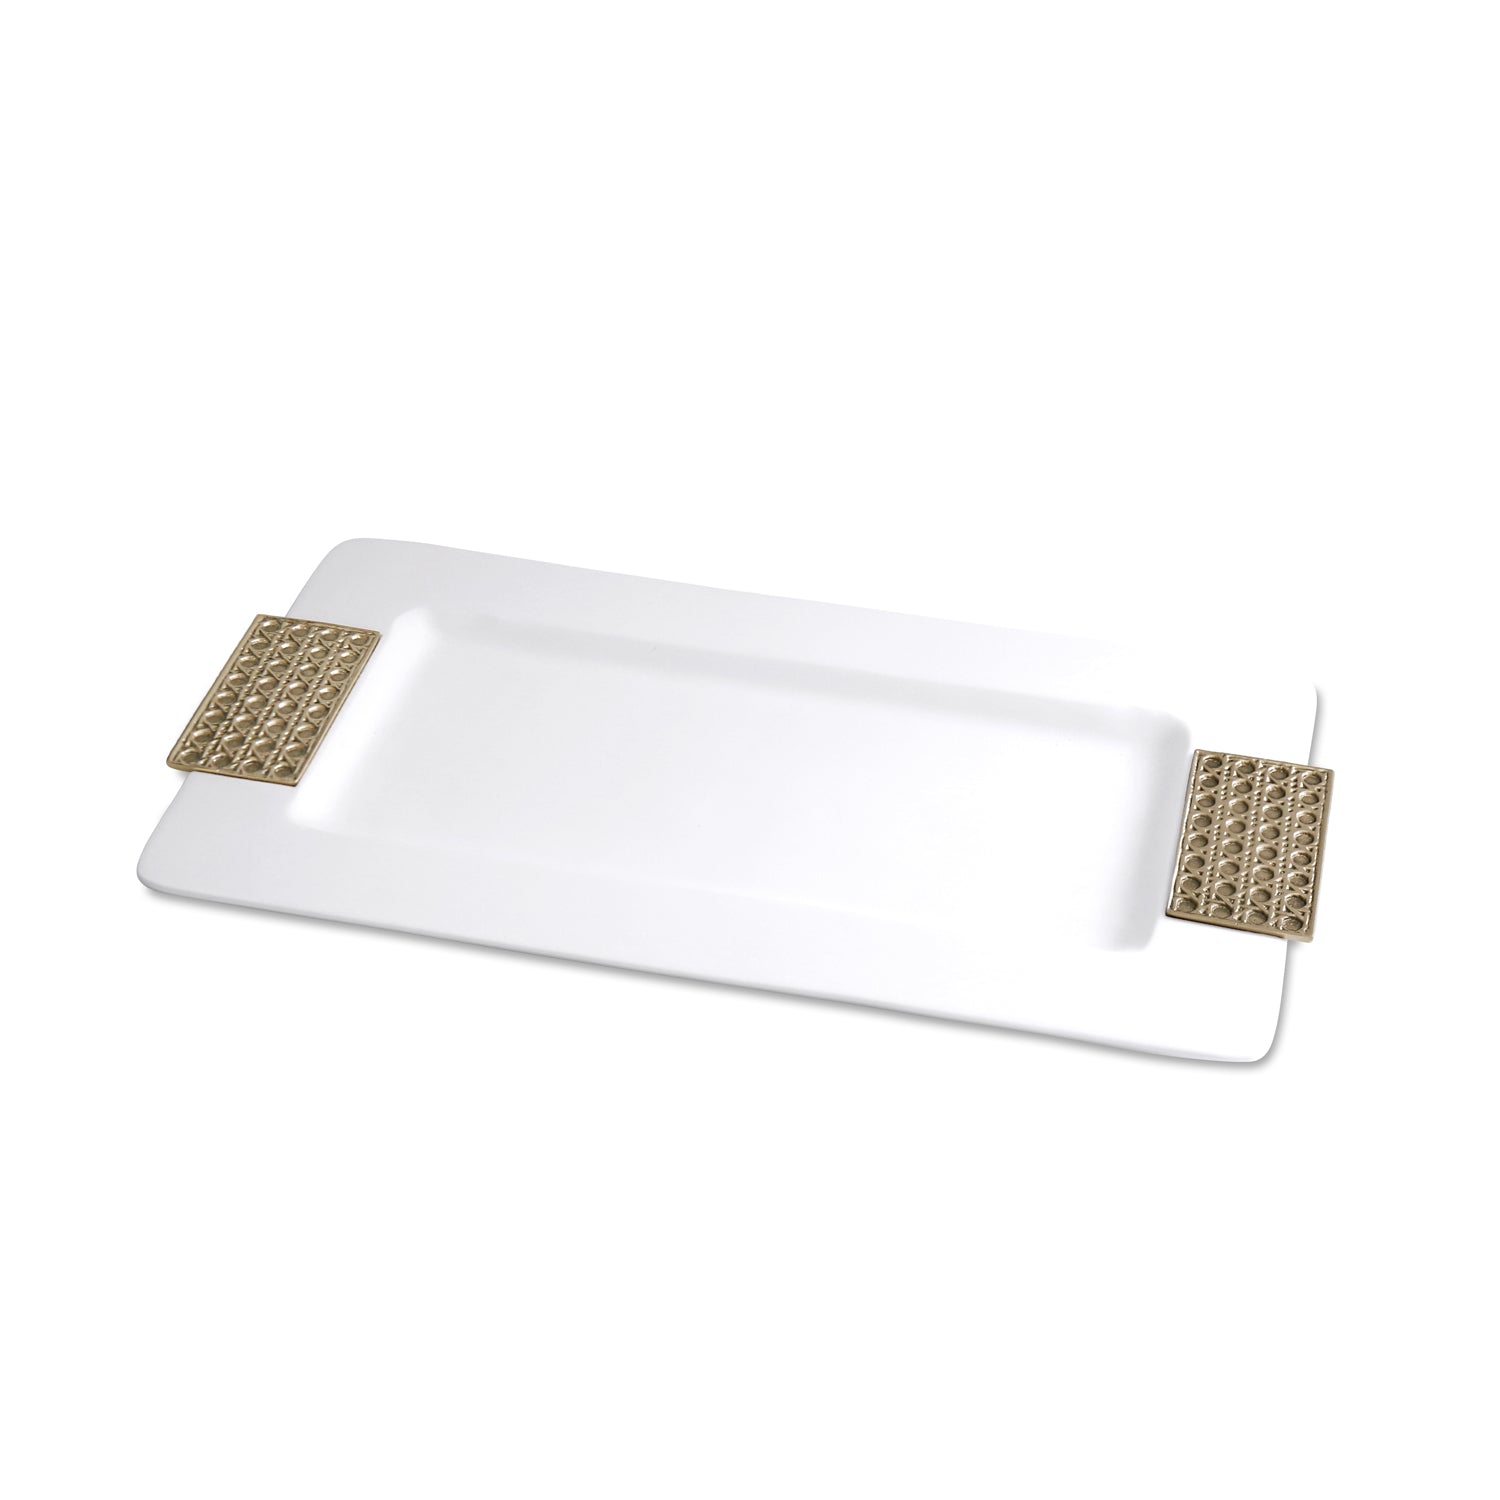 THANNI Rattan Long Rectangular Tray (White and Gold)